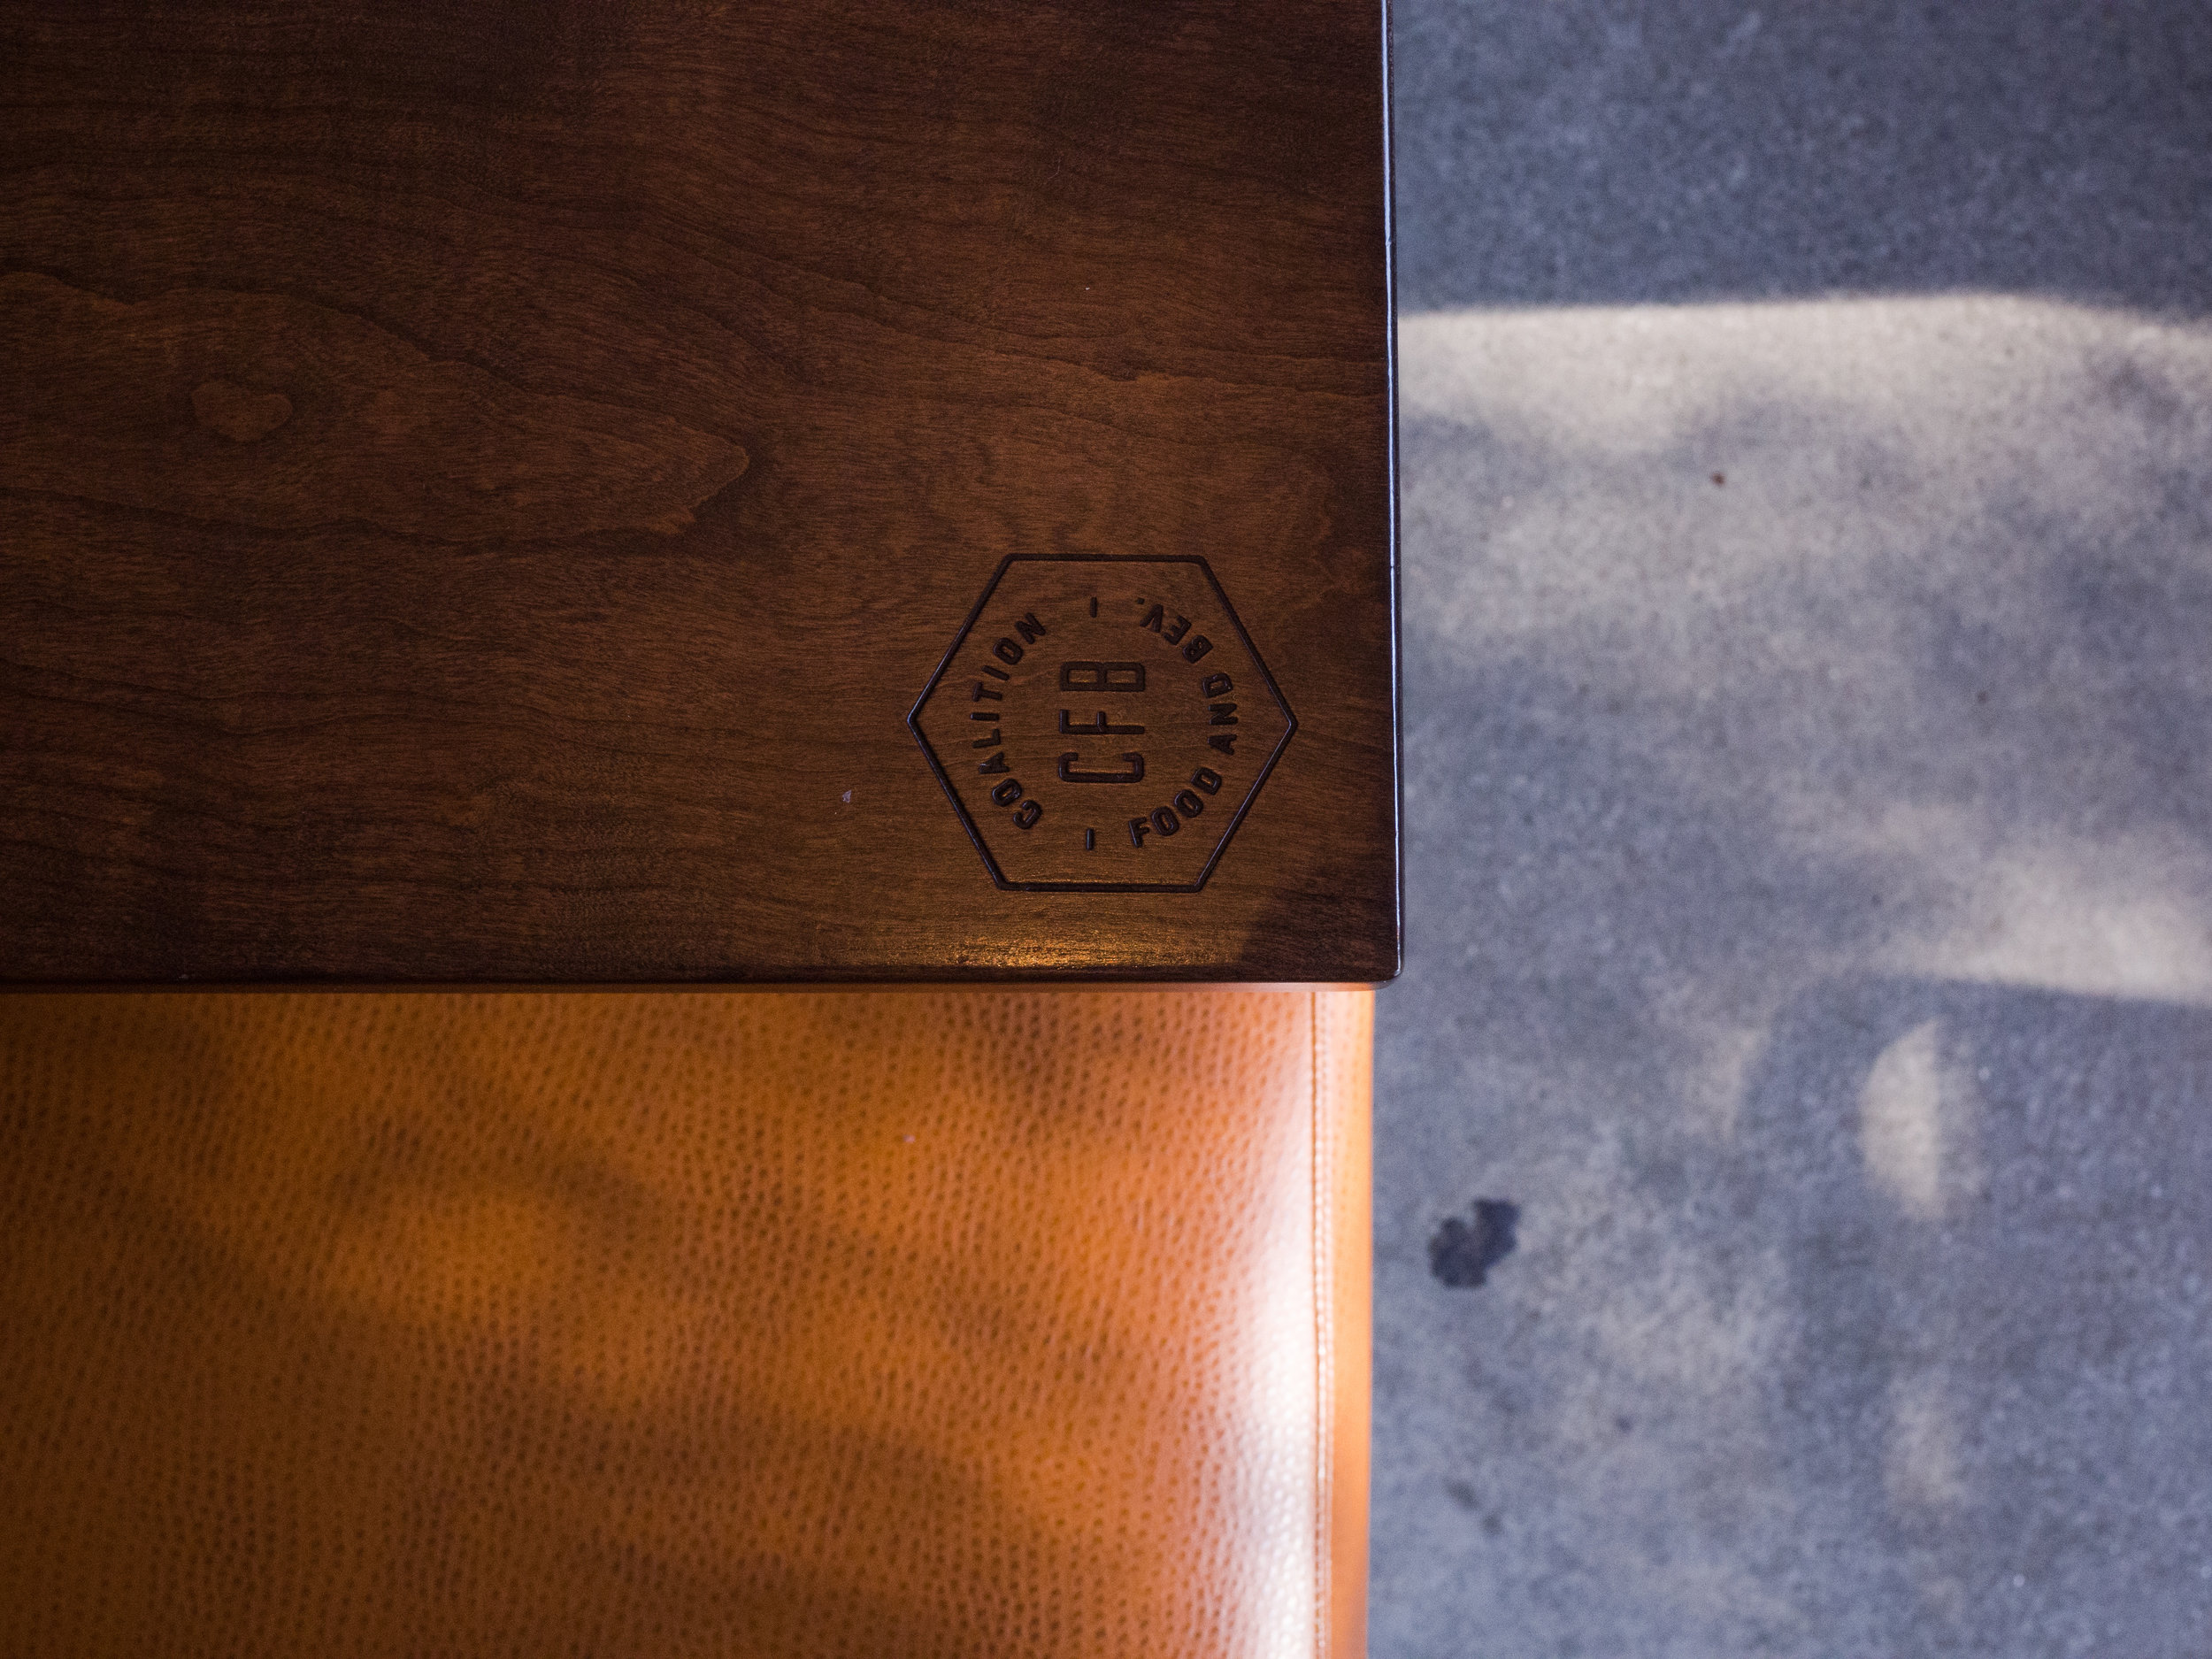 Coalition Food and Beverage Interior table with logo stamp